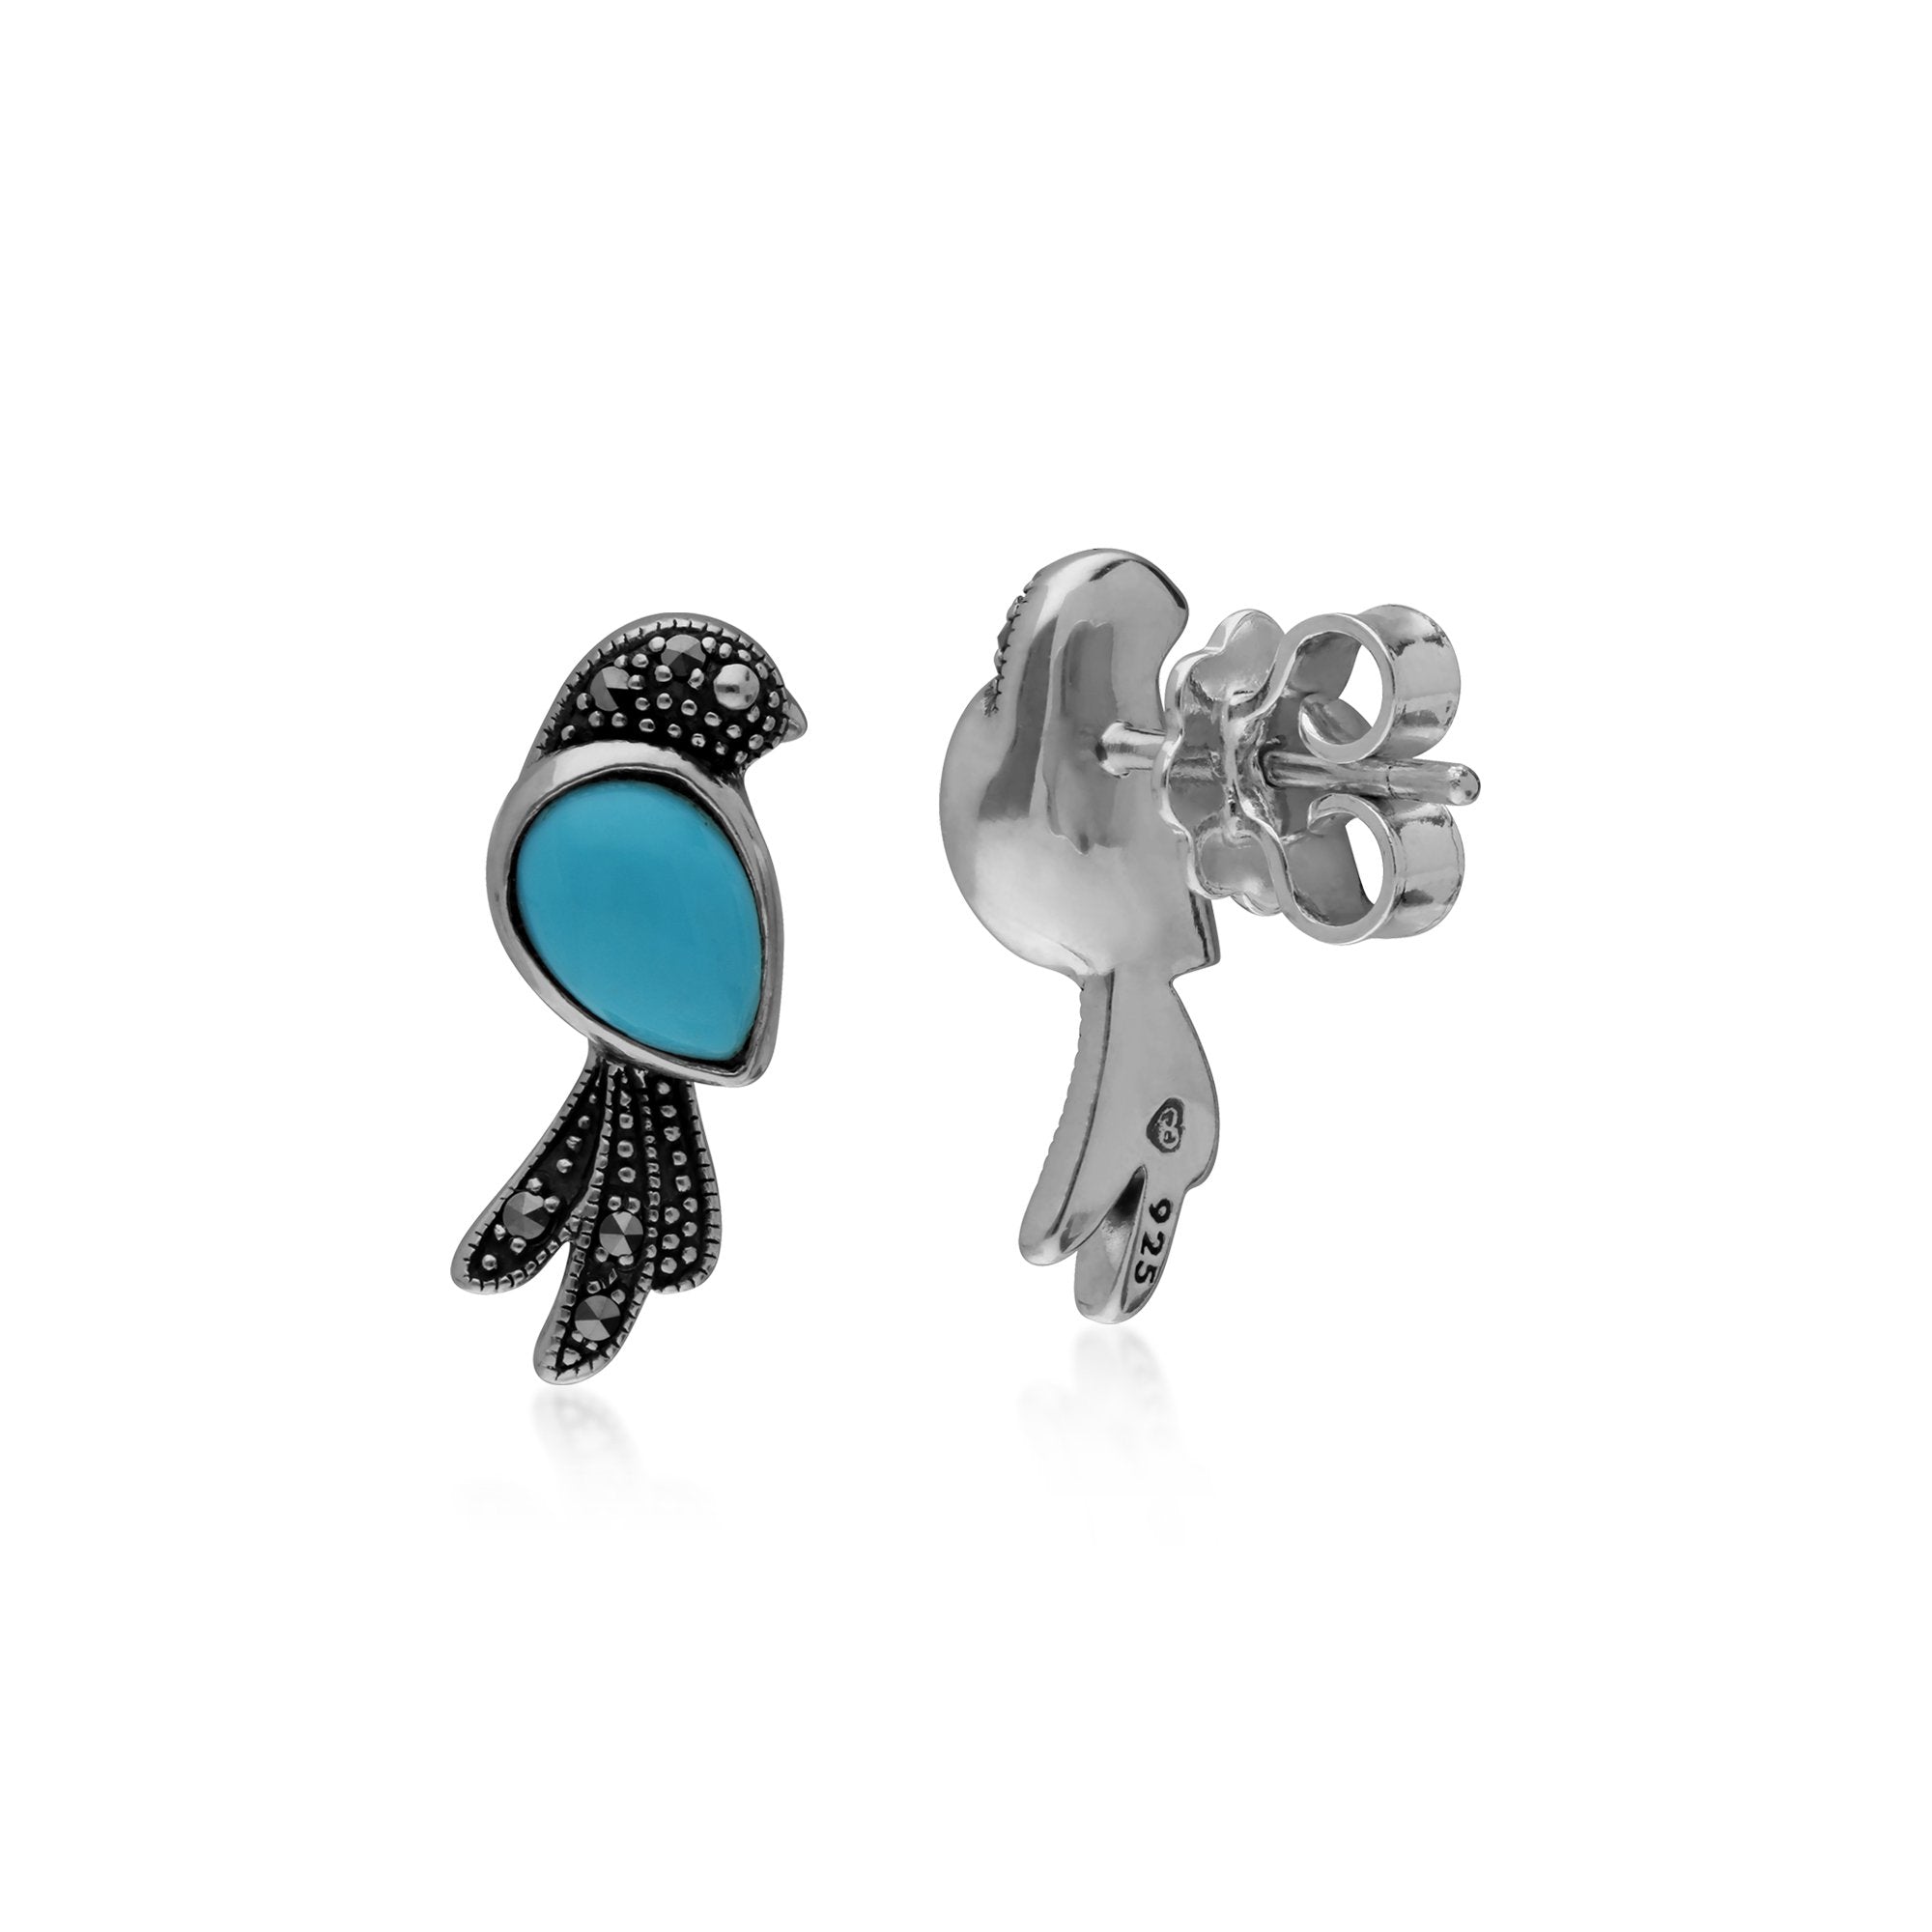 Classic Pear Turquoise & Marcasite Bird Stud Earrings in 925 Sterling Silver